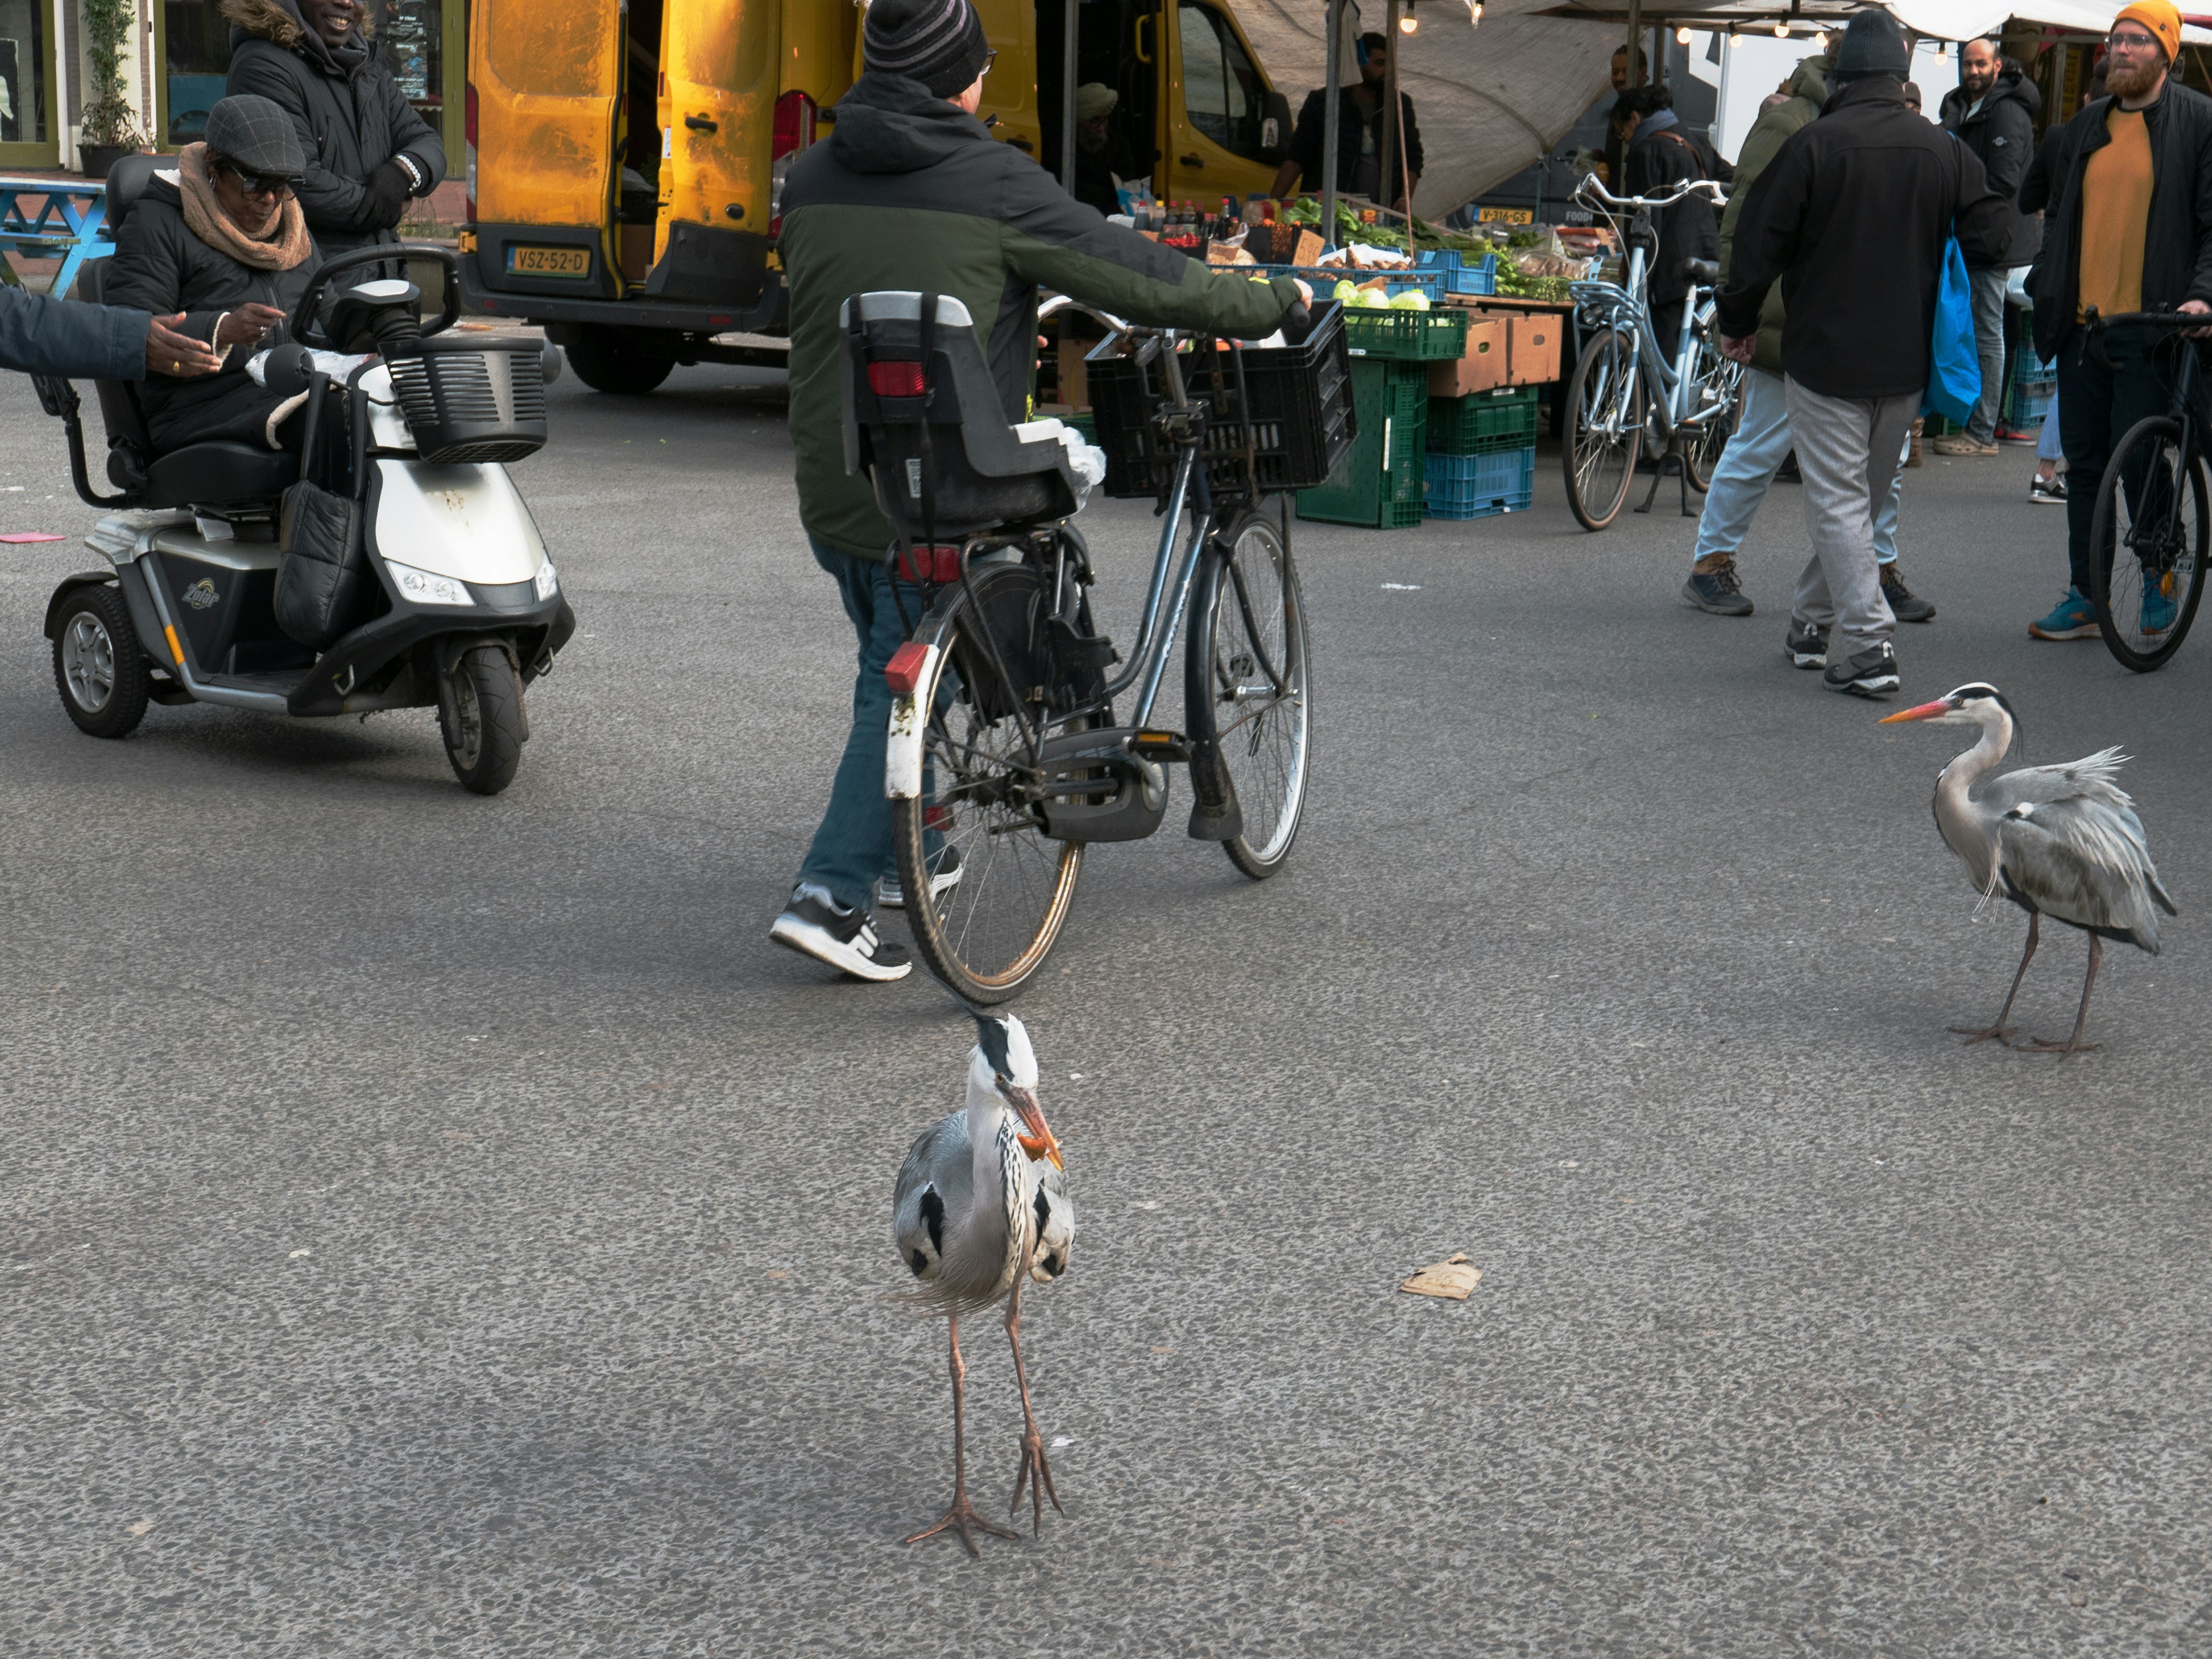 Two herons are walking over the street market very freely, near the popular fish stall on the square Dapperplein in Amsterdam East. The local people give them priority, so they can go where they want between the scoot mobiles, pedestrians and people, walking with thier bicycles.